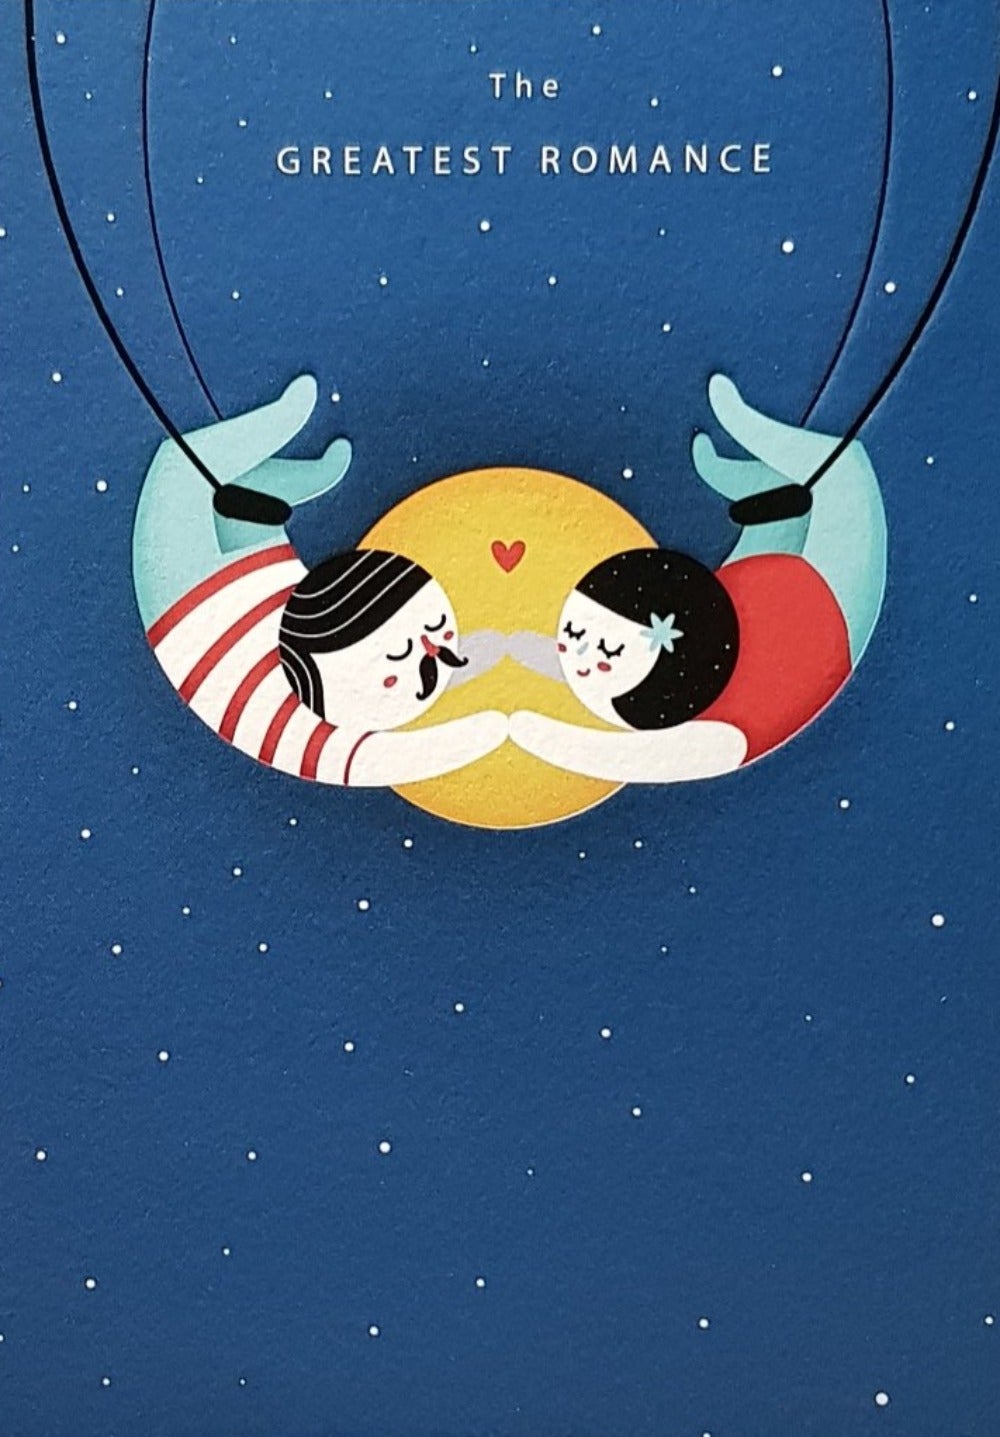 Anniversary Card - 'The Greatest Romance' & Couple In Front Of The Moon